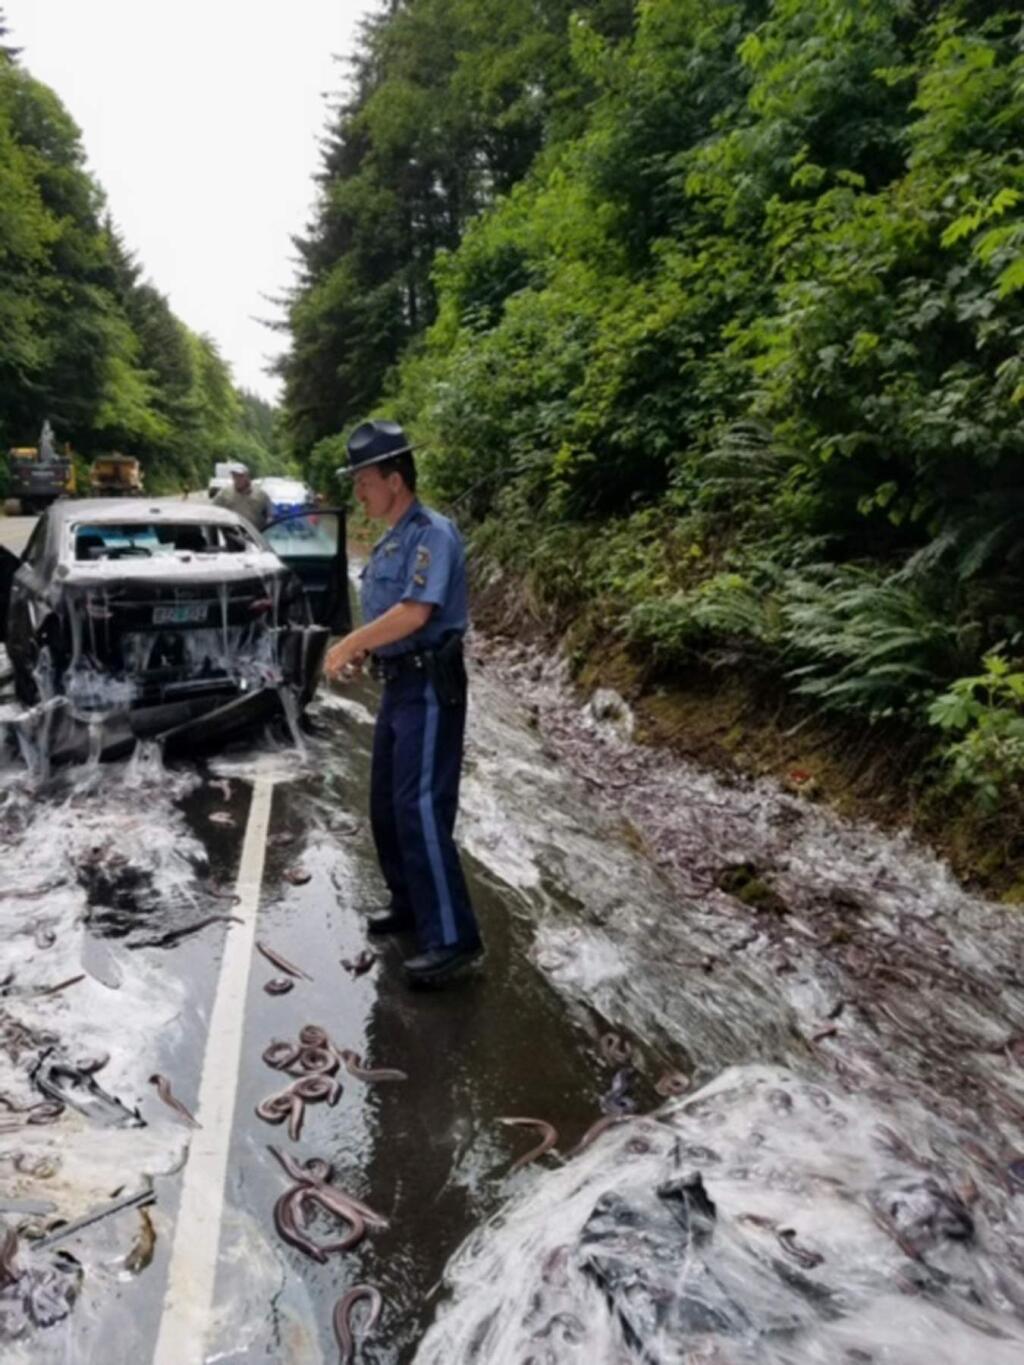 In this photo provided by the Oregon State Police, a state police officer works the site after a truck hauling eels overturned on Highway 101 in Depoe Bay, Ore., Thursday, July 13, 2017. Police said Salvatore Tragale was driving north with 13 containers holding 7,500 pounds (3,402 kilograms) of hagfish, which are commonly known as slime eels. (Oregon State Police via AP)